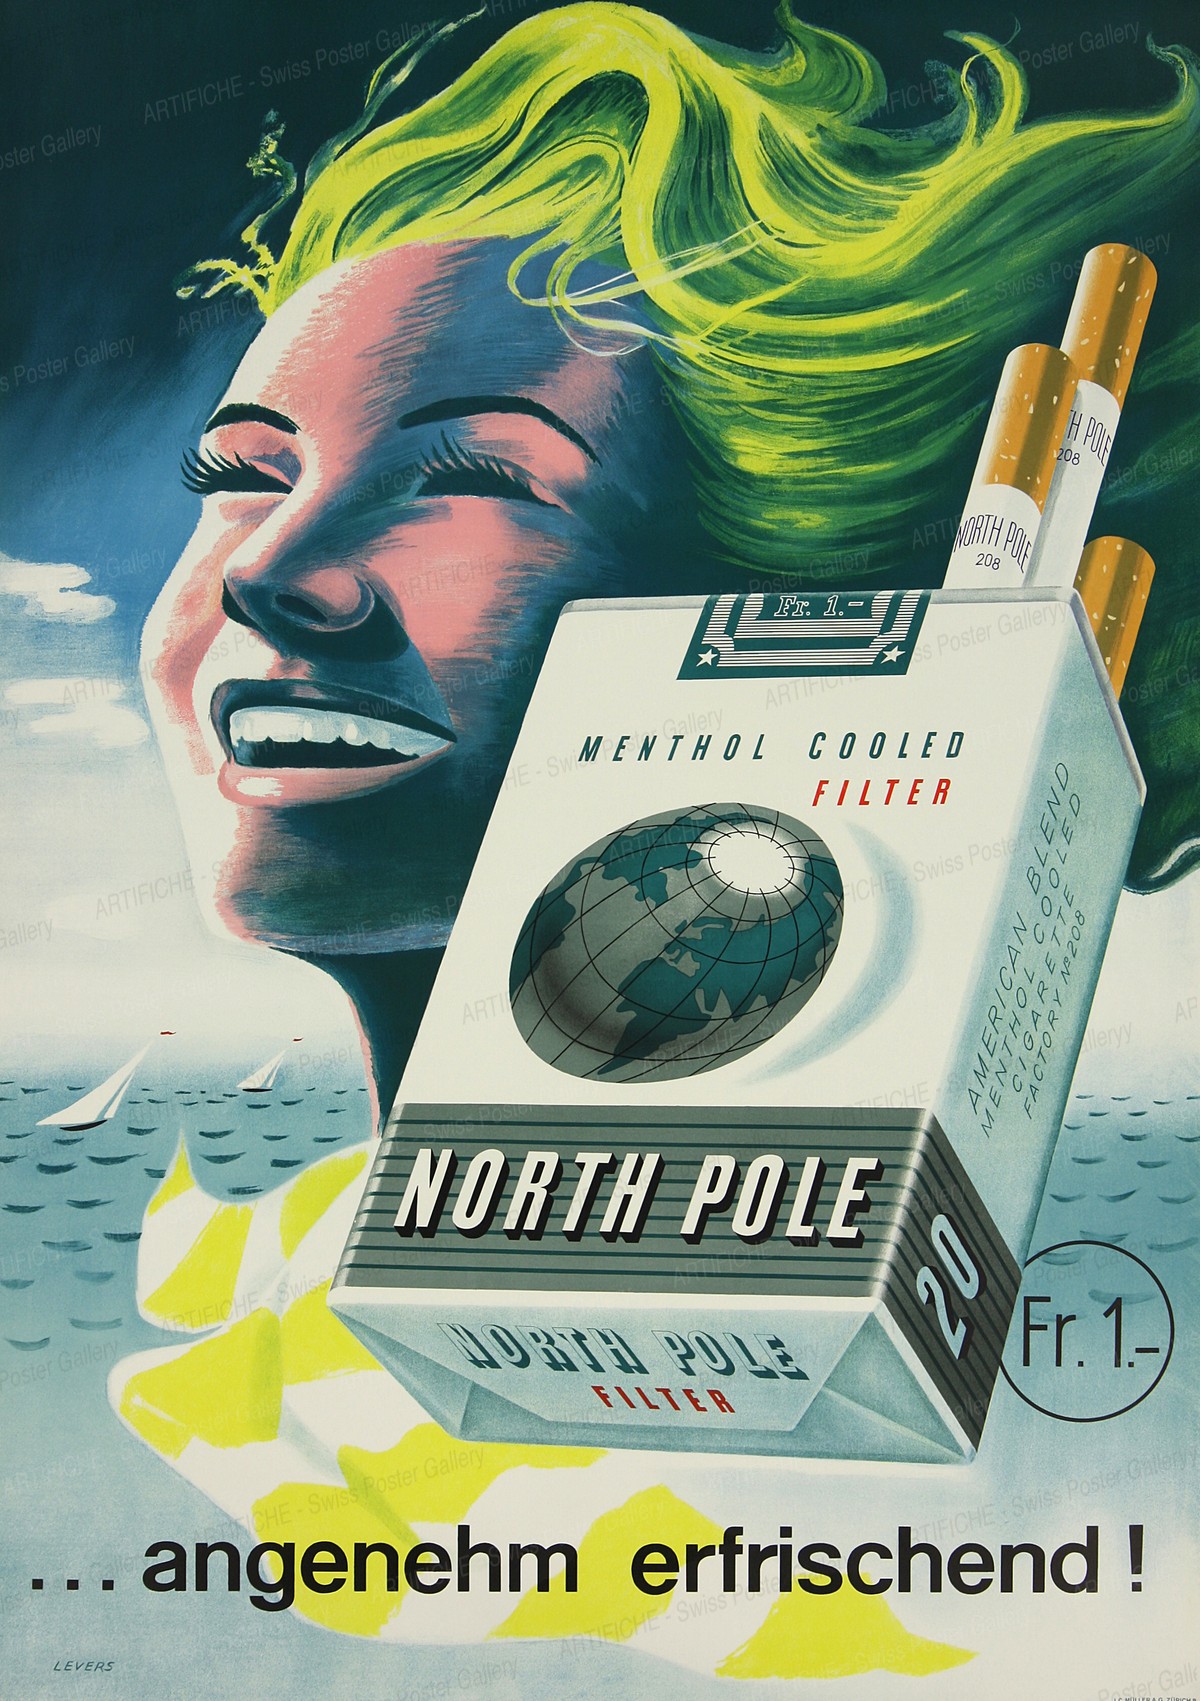 North Pole menthol cooled filter … angenehm erfrischend!, Rudolph Levers